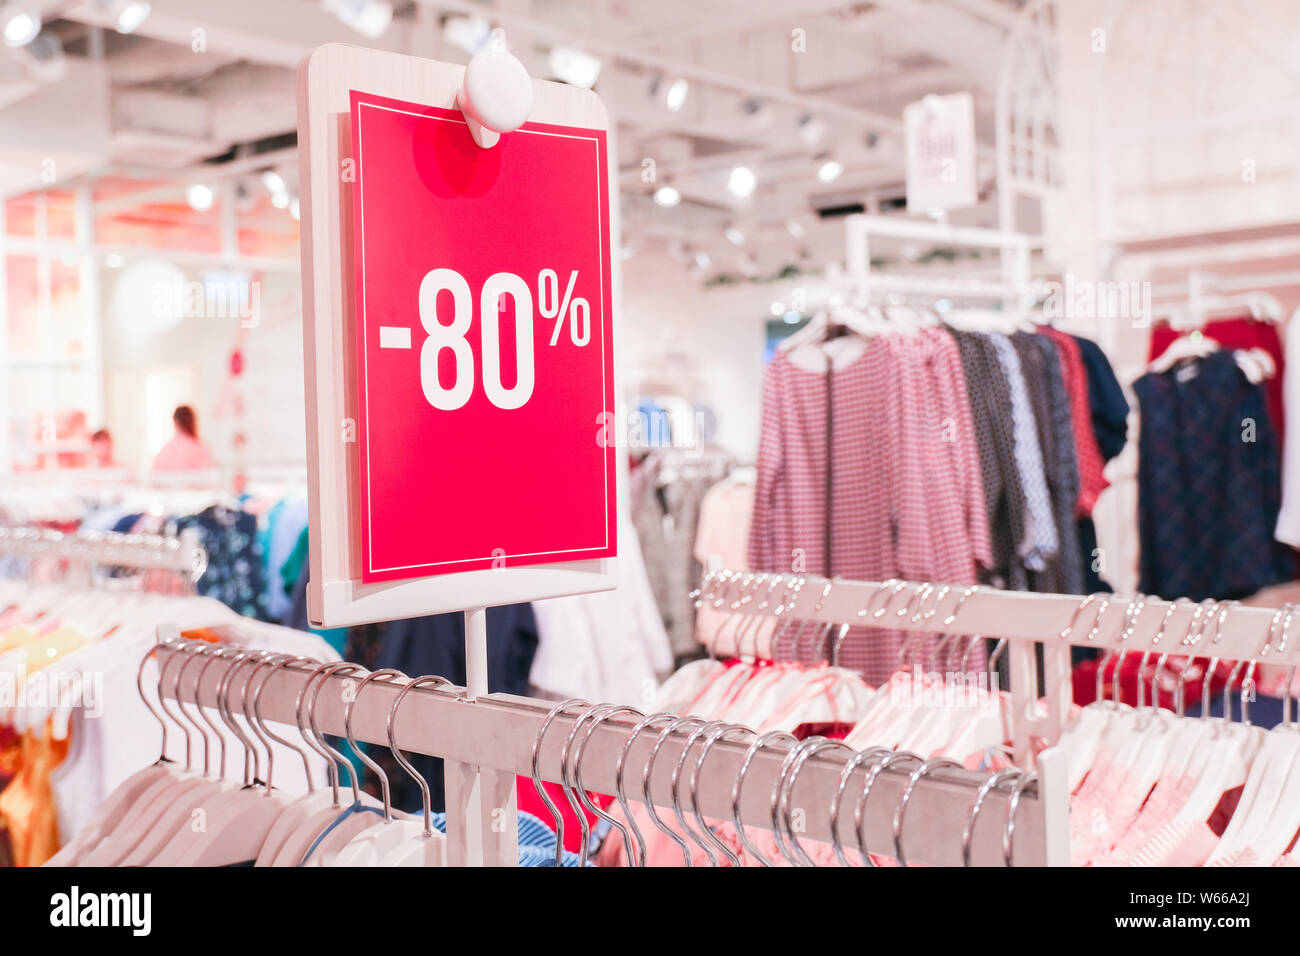 Season sale, black friday and shopping concept. Red label 80 percent discount price in shop. Clothes hangers on background. Stock Photo